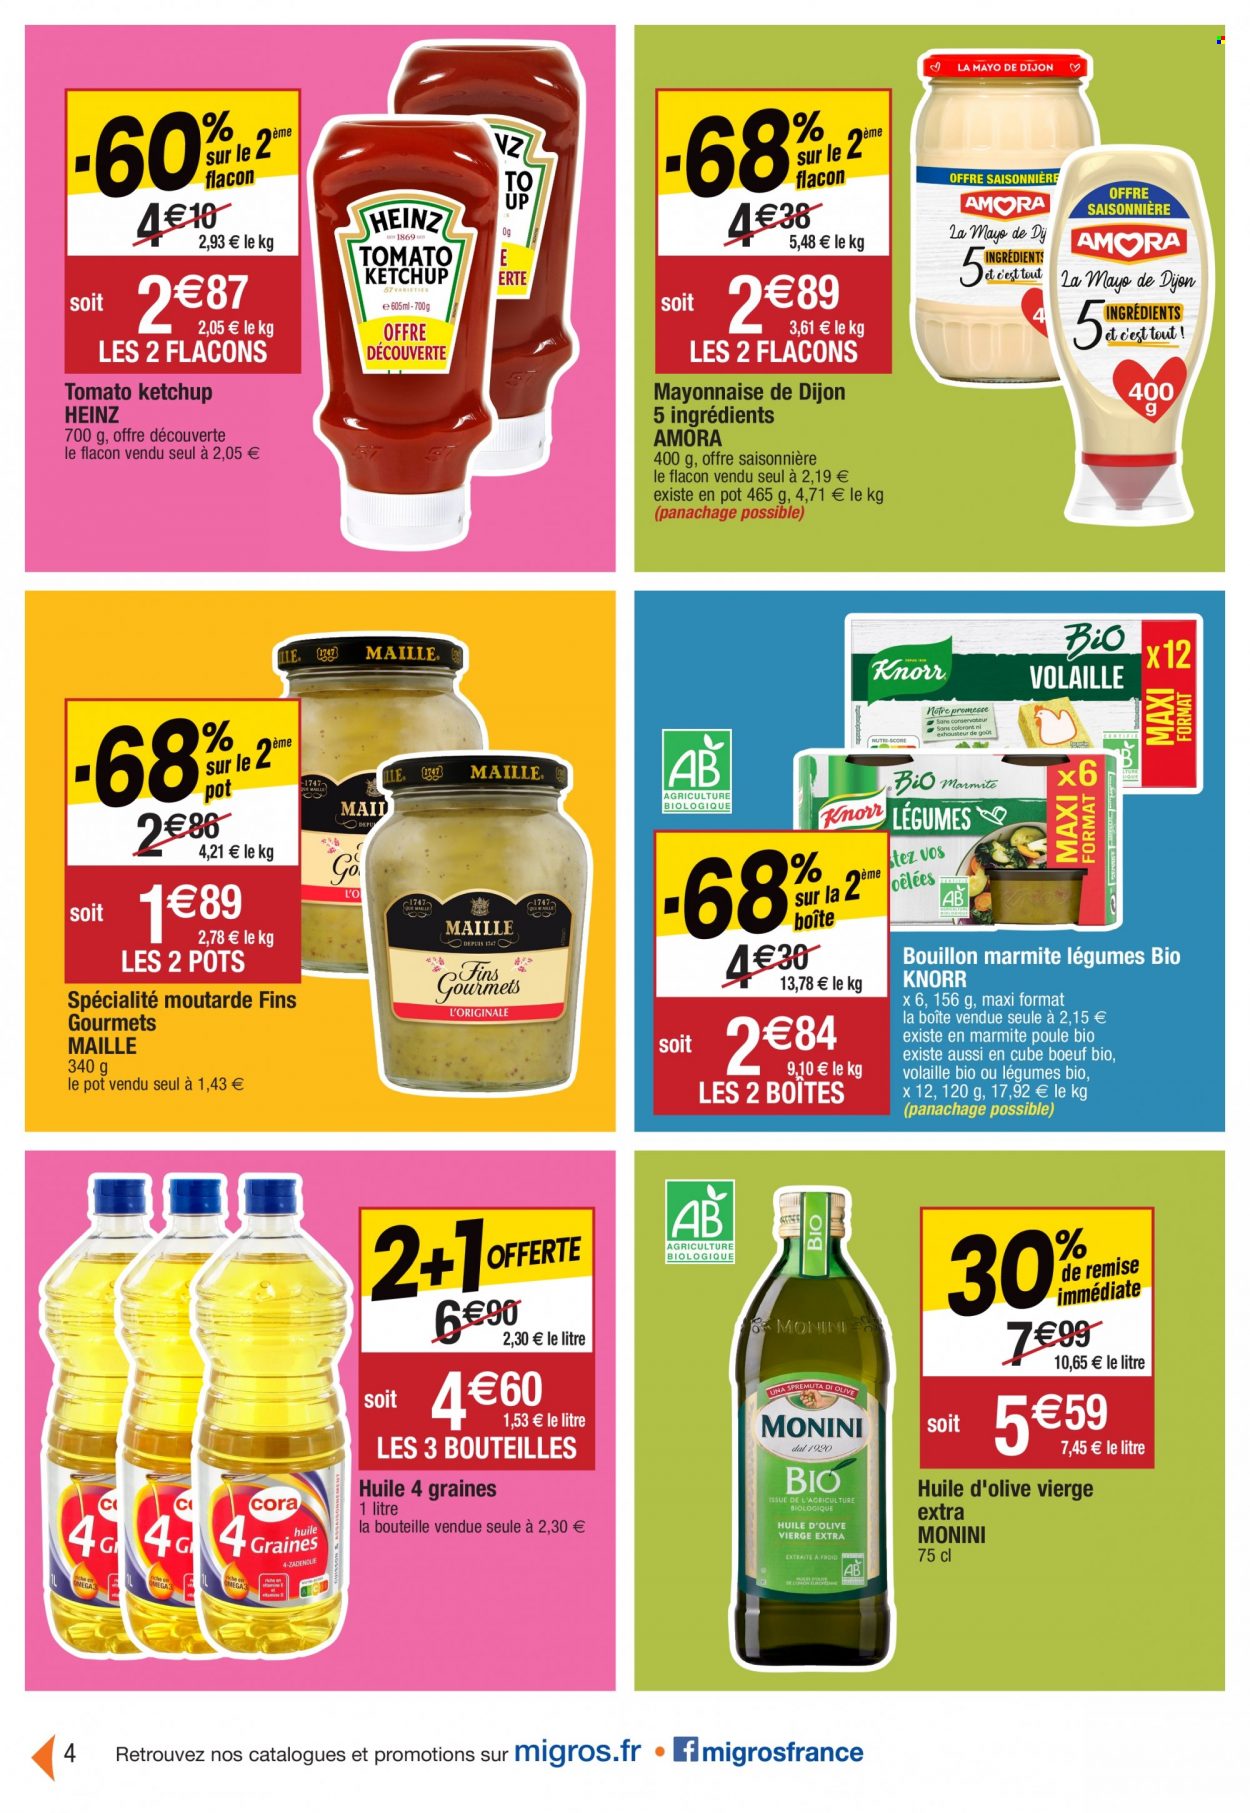 thumbnail - Catalogue Migros France - 28/09/2021 - 03/10/2021 - Produits soldés - Knorr, mayonnaise, bouillon, Heinz, moutarde, ketchup, Maille, huile, huile d'olive vierge extra, huile d'olive. Page 4.